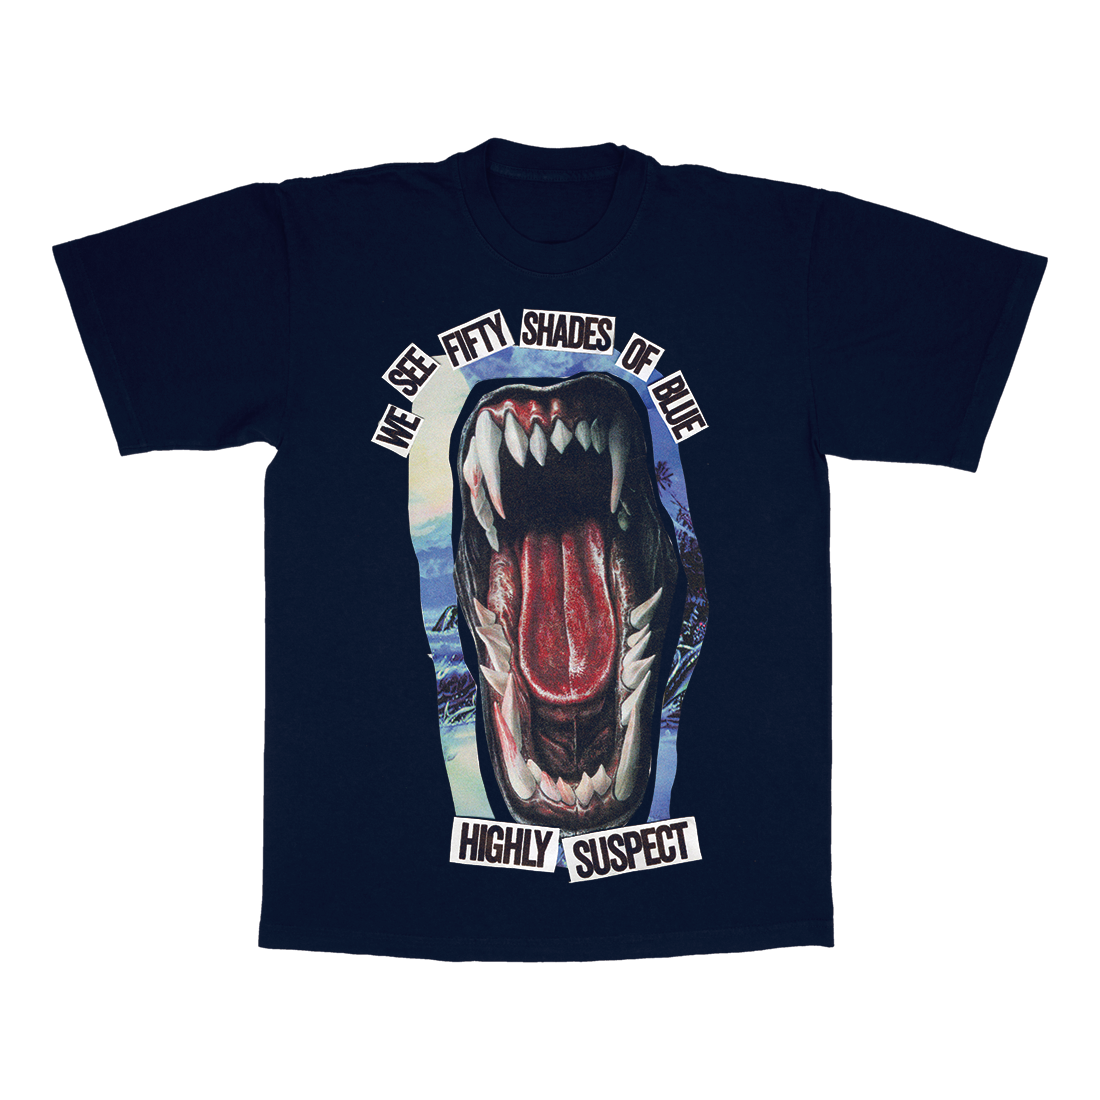 Highly Suspect - The Blue-Eyed Devil Tee